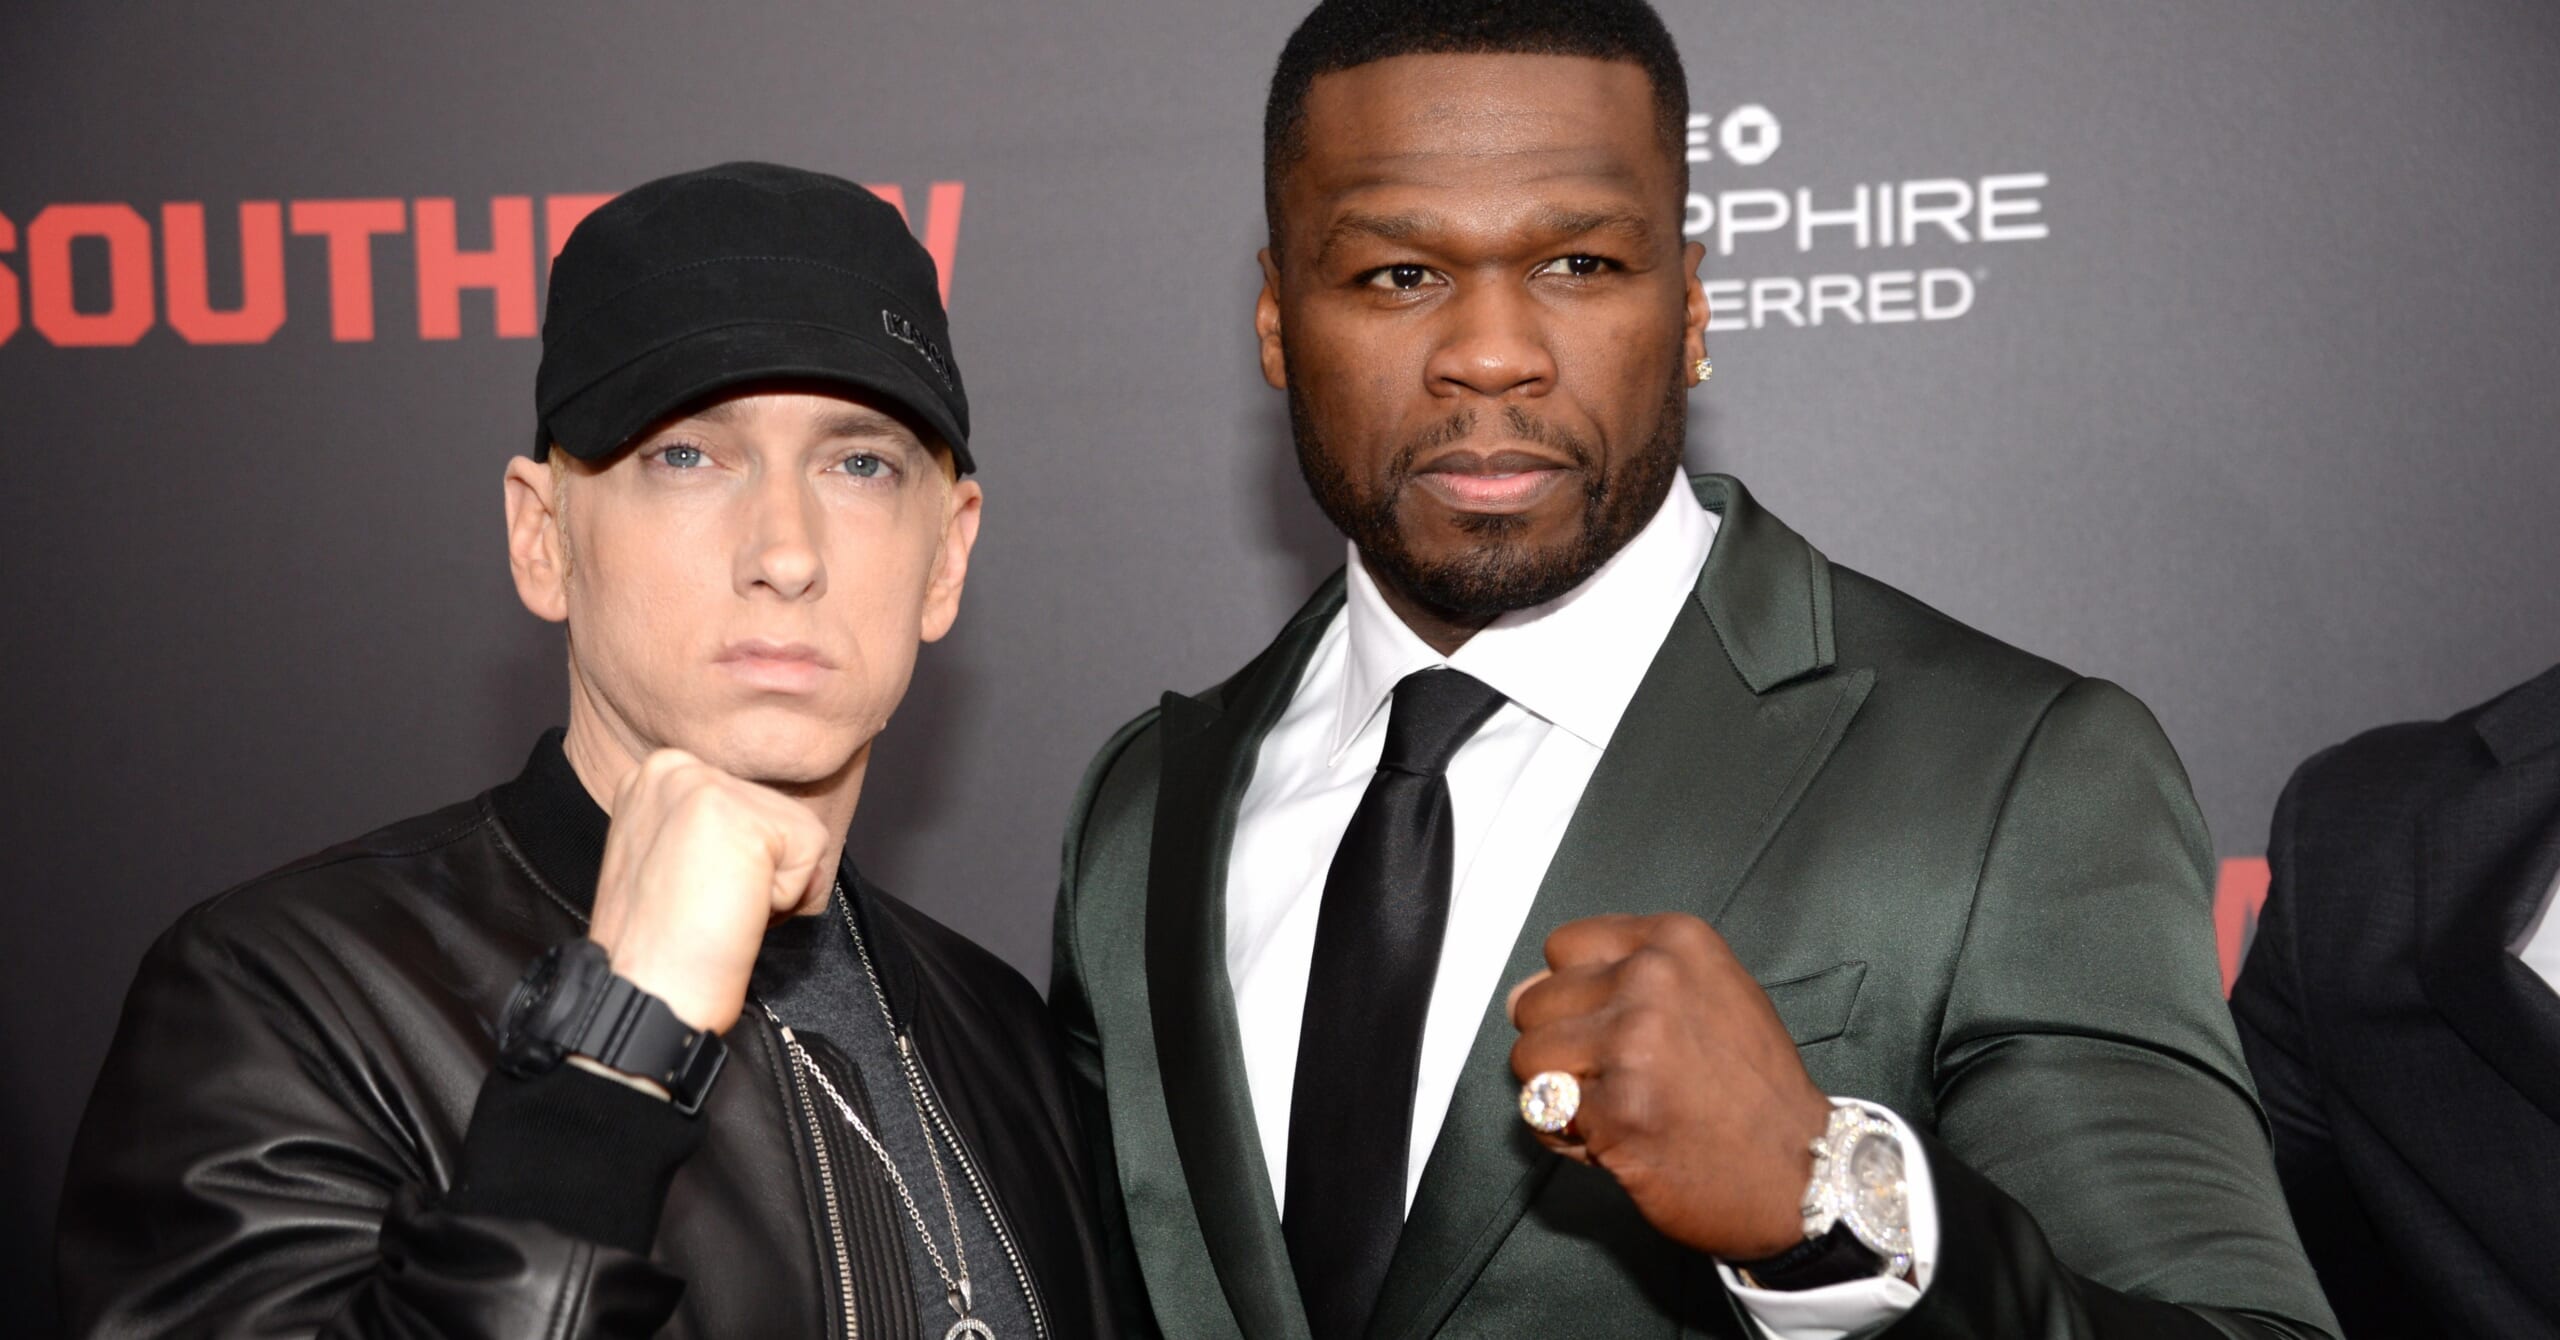 How to watch Eminem's Rock & Roll Hall of Fame induction Saturday